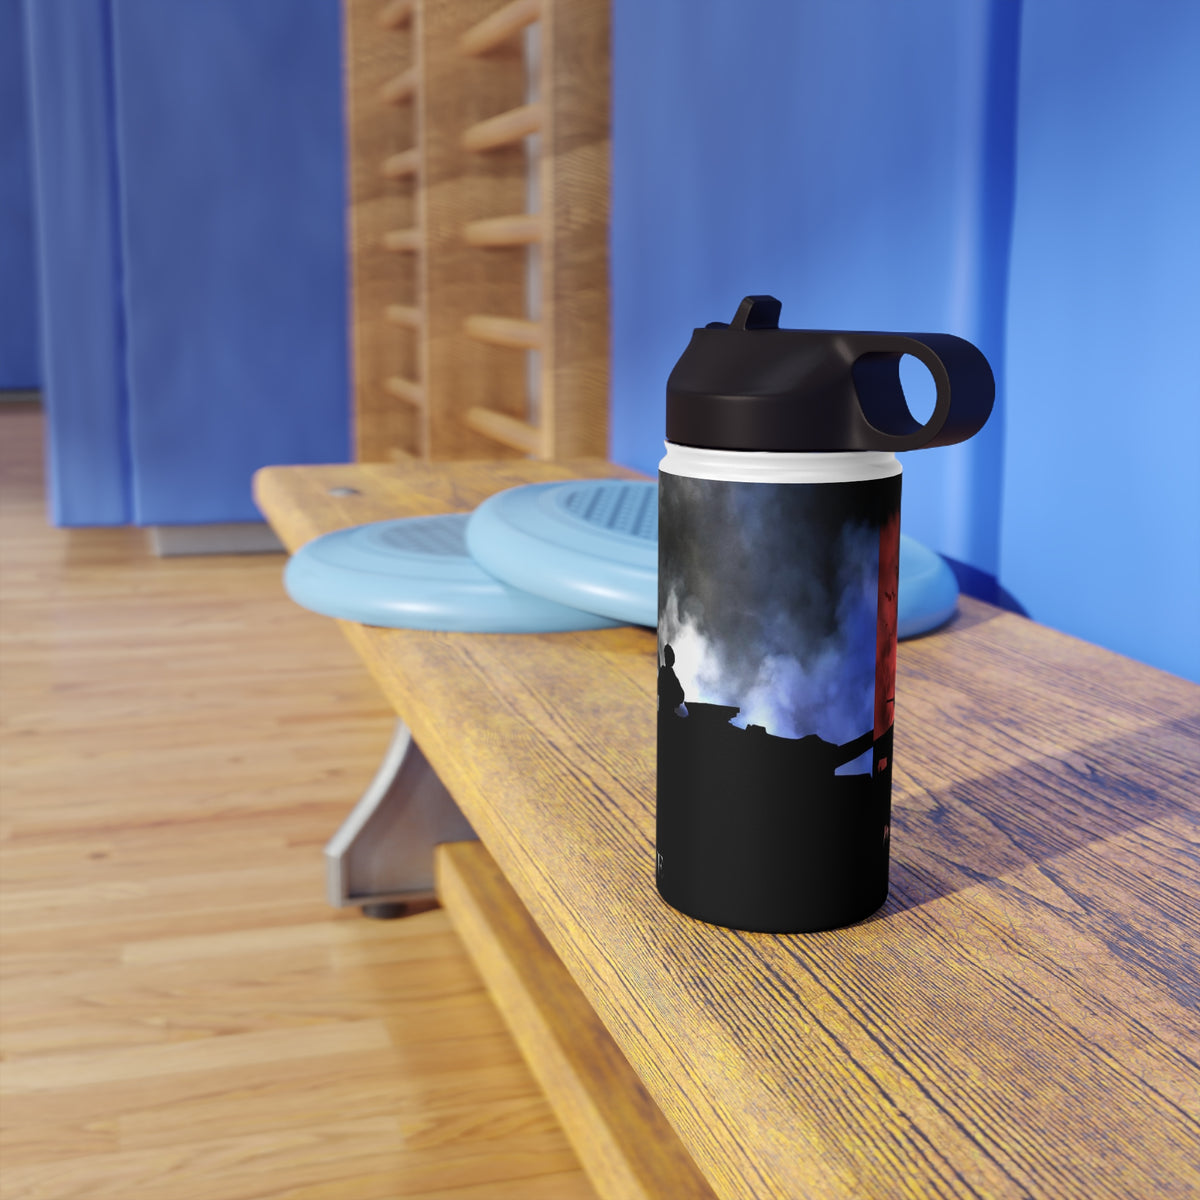 Colors of Freedom, Stainless Steel Water Bottle